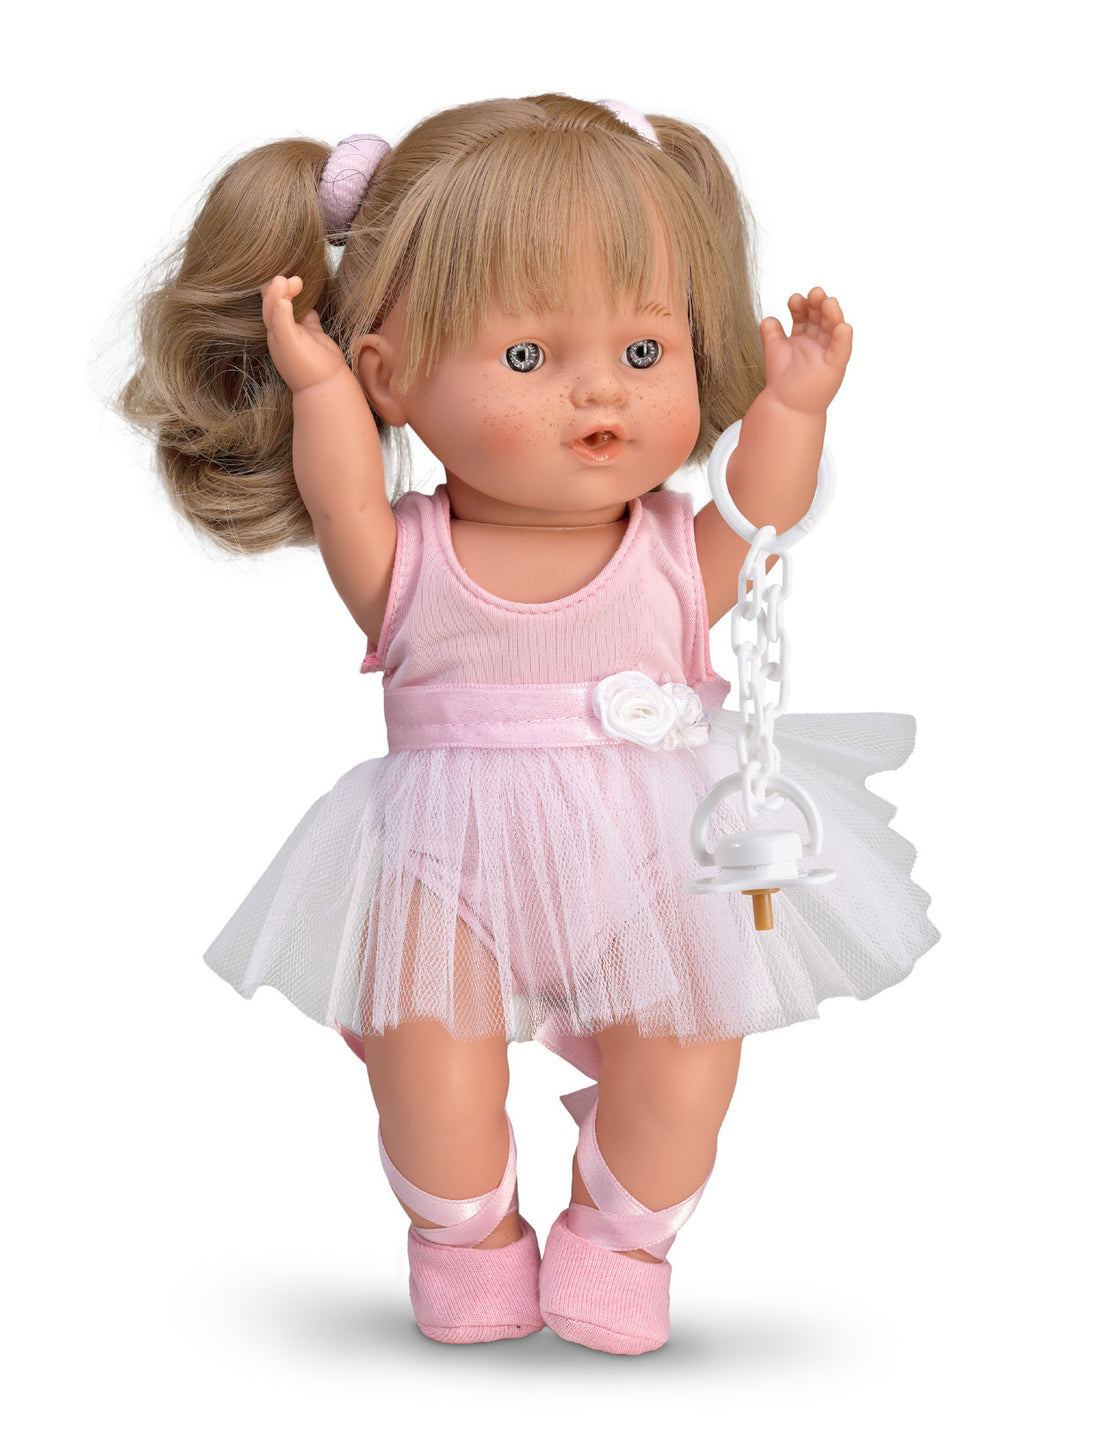 Handcrafted Dancer Collection Magic Baby Doll (3040) by LAMAGIK